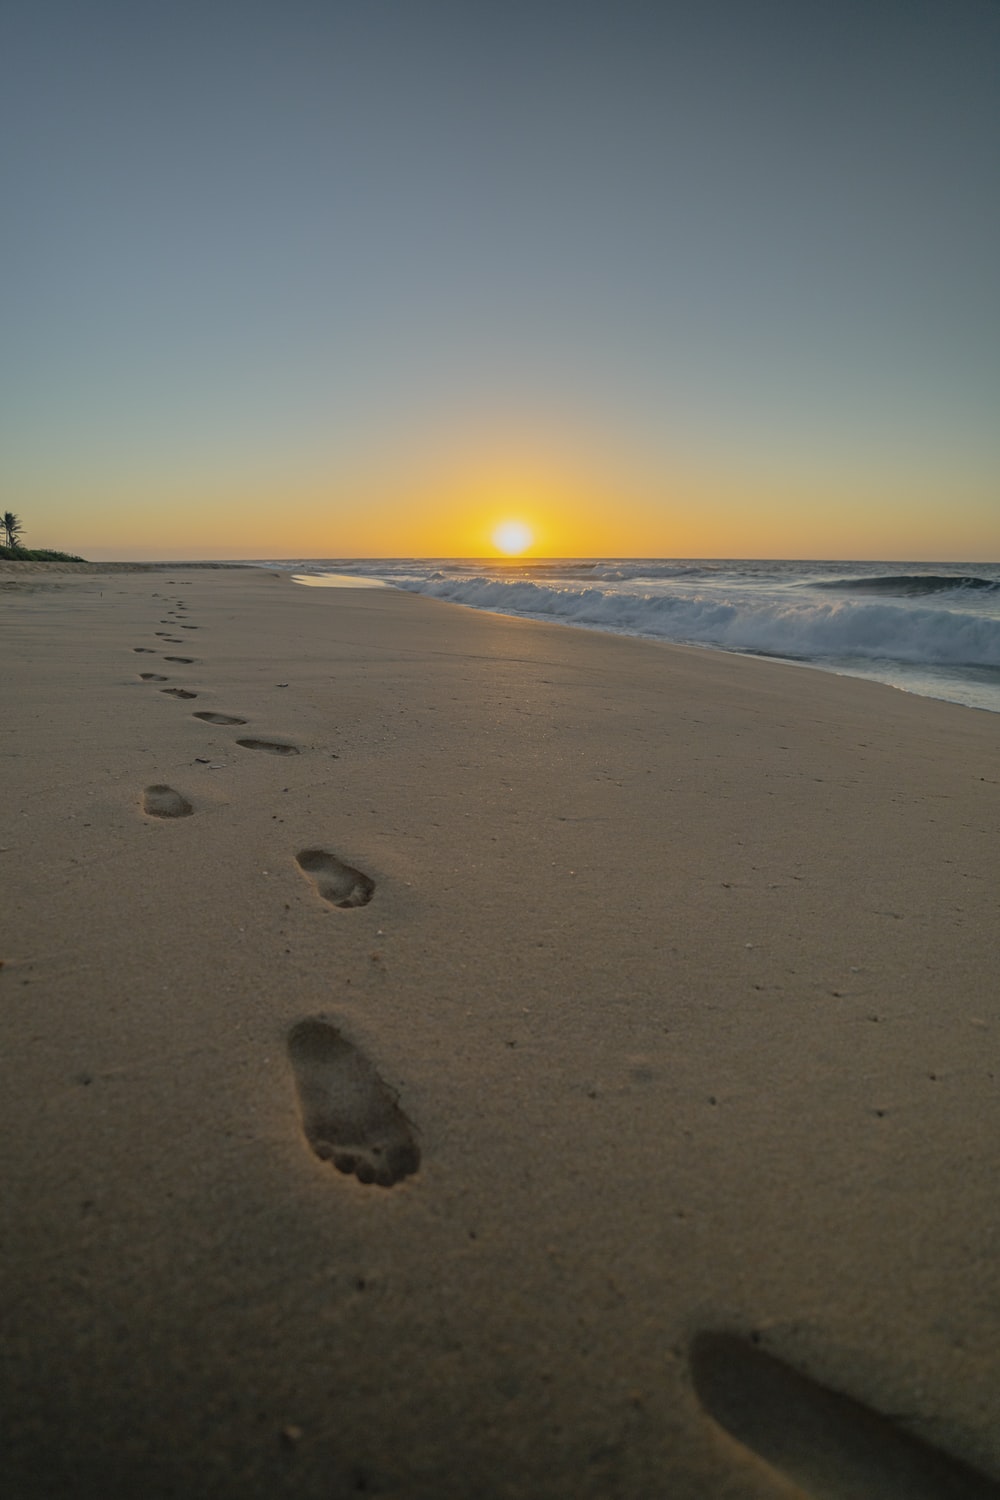 1K Footprints In The Sand Pictures Download Free Images on